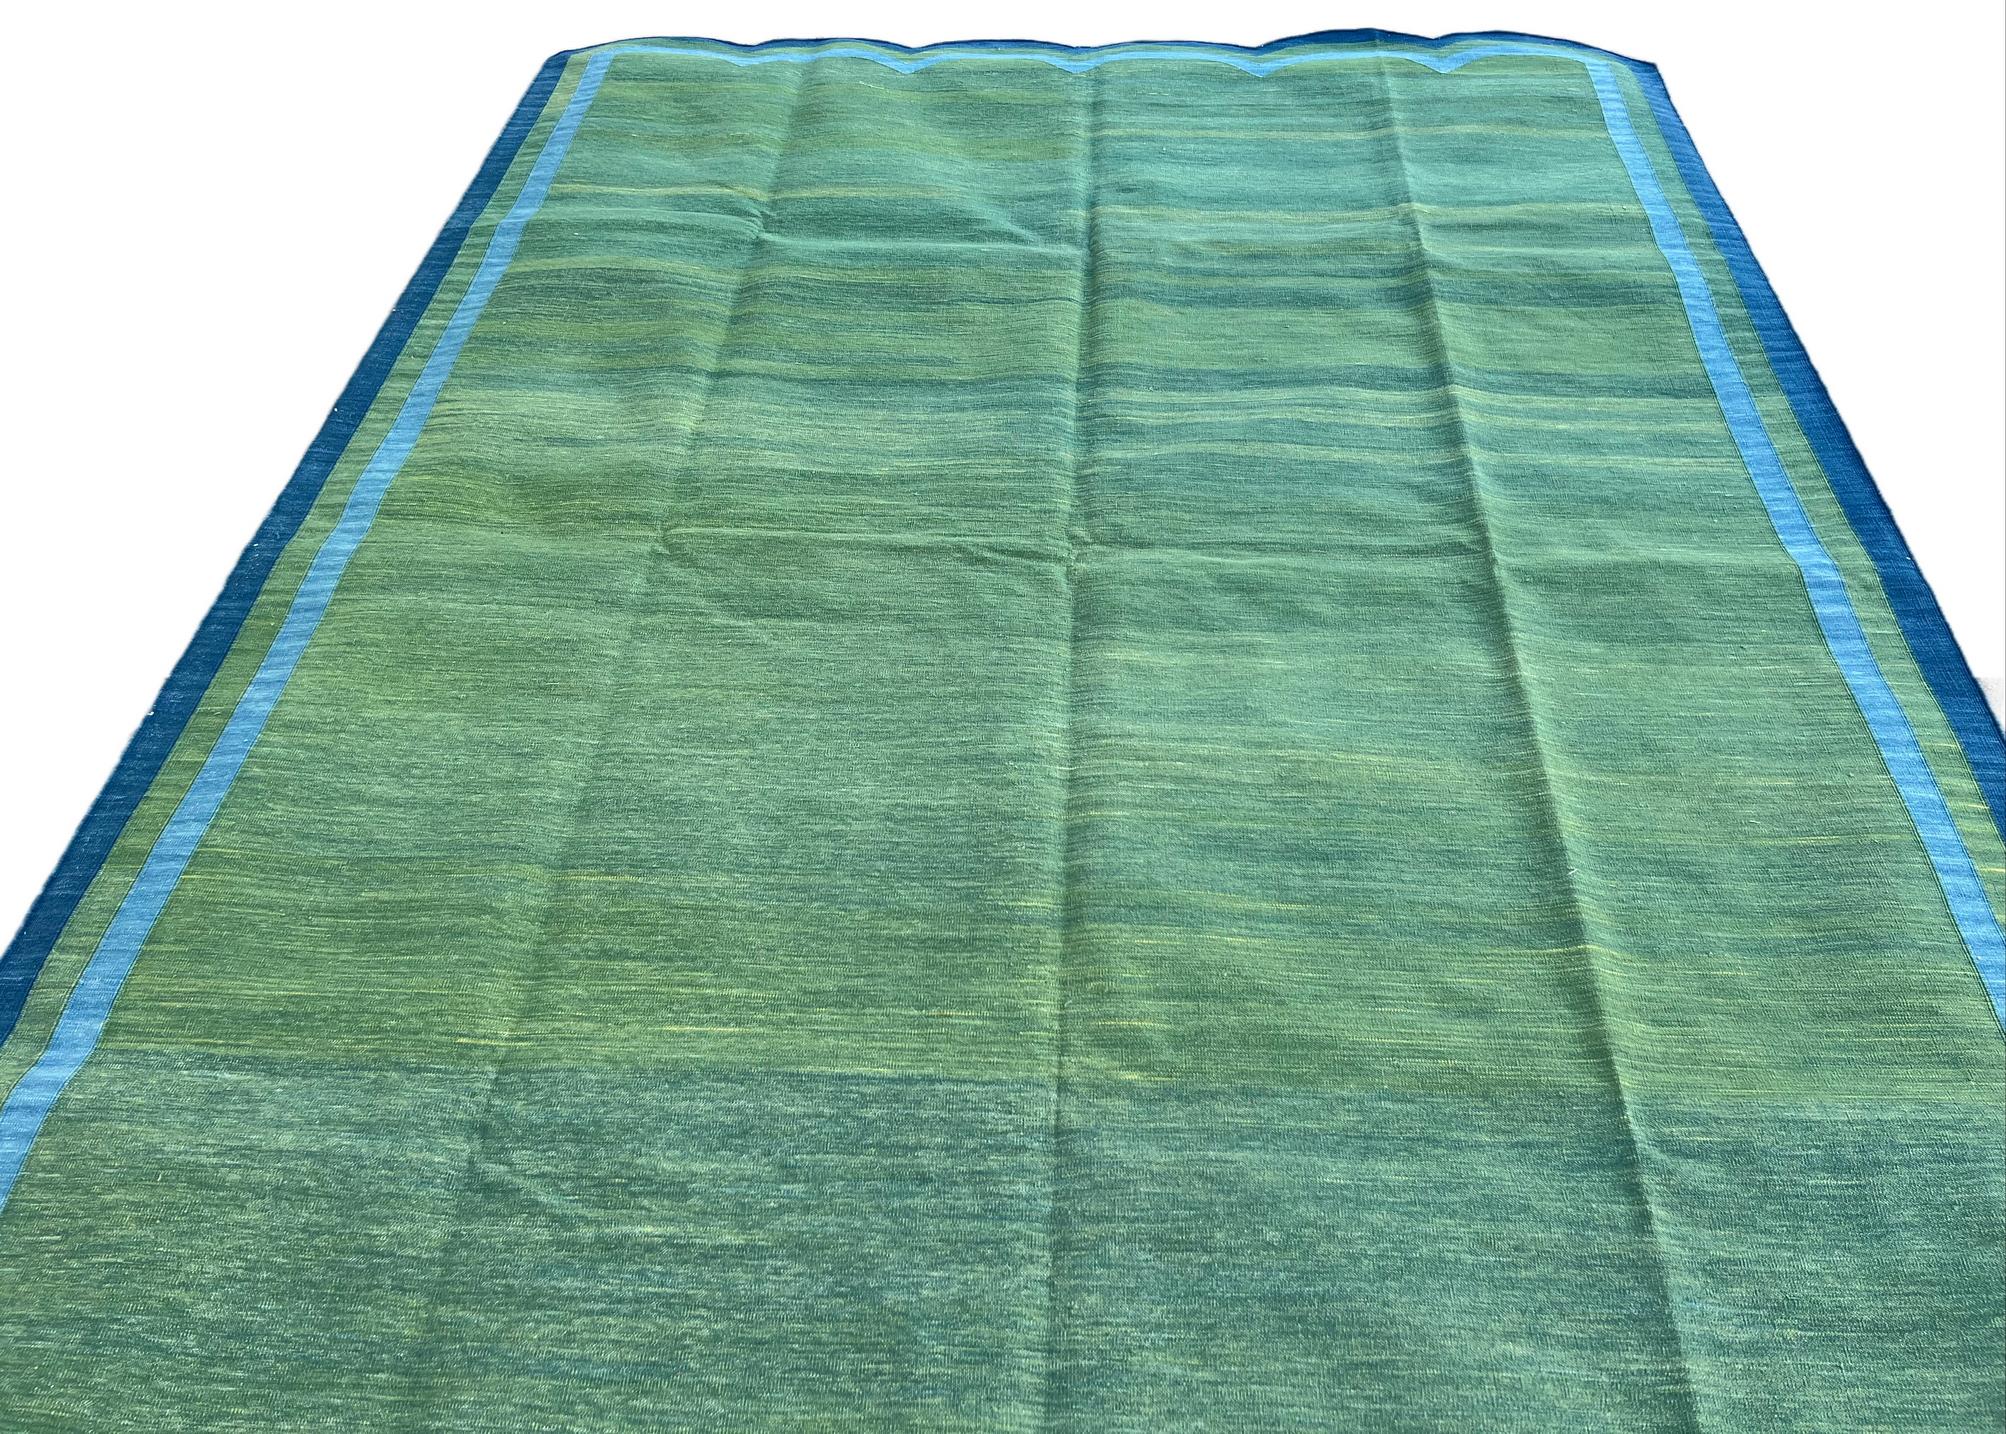 Contemporary Handmade Cotton Area Flat Weave Rug, 6x9 Green And Blue Scallop Striped Dhurrie For Sale